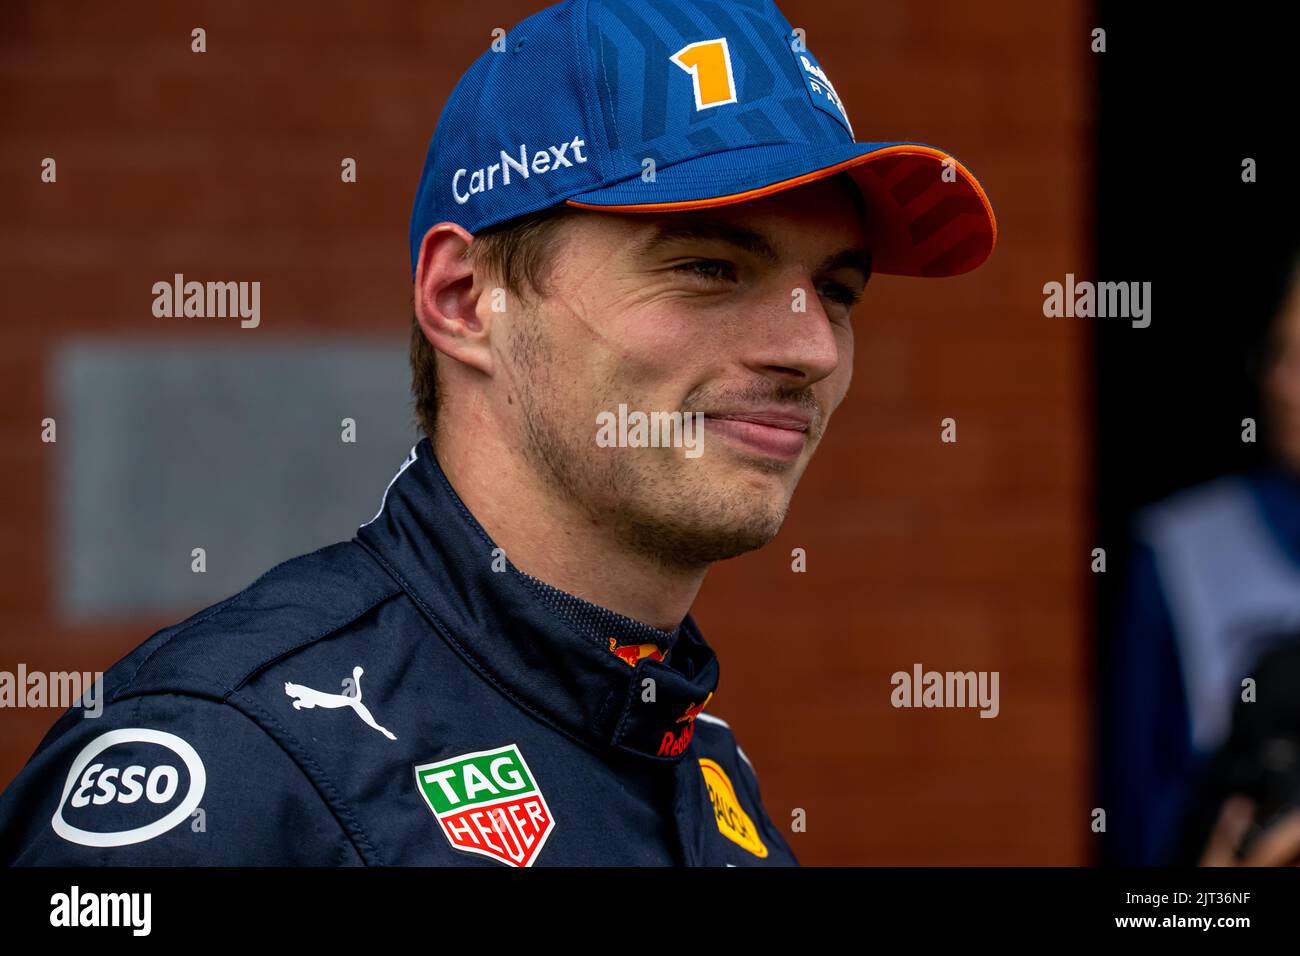 Stavelot, Belgium, 27th Aug 2022, Max Verstappen, from Netherlands competes for Red Bull Racing. Qualifying, round 14 of the 2022 Formula 1 championship. Credit: Michael Potts/Alamy Live News Stock Photo